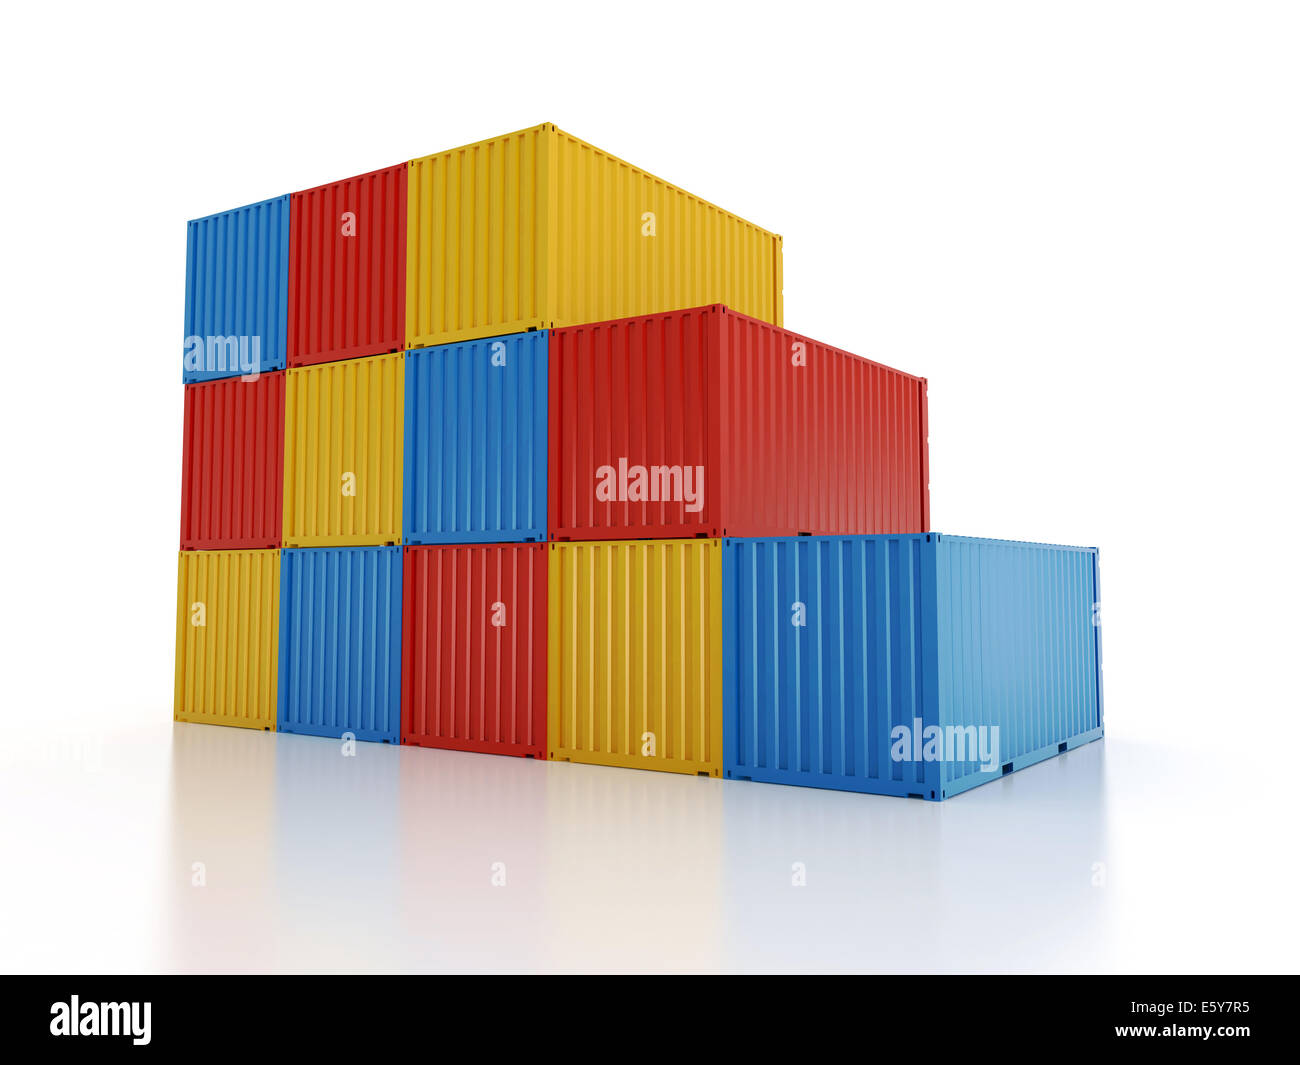 Set of red and orange metal freight shipping containers on white background - photorealistic 3d perspective render Stock Photo